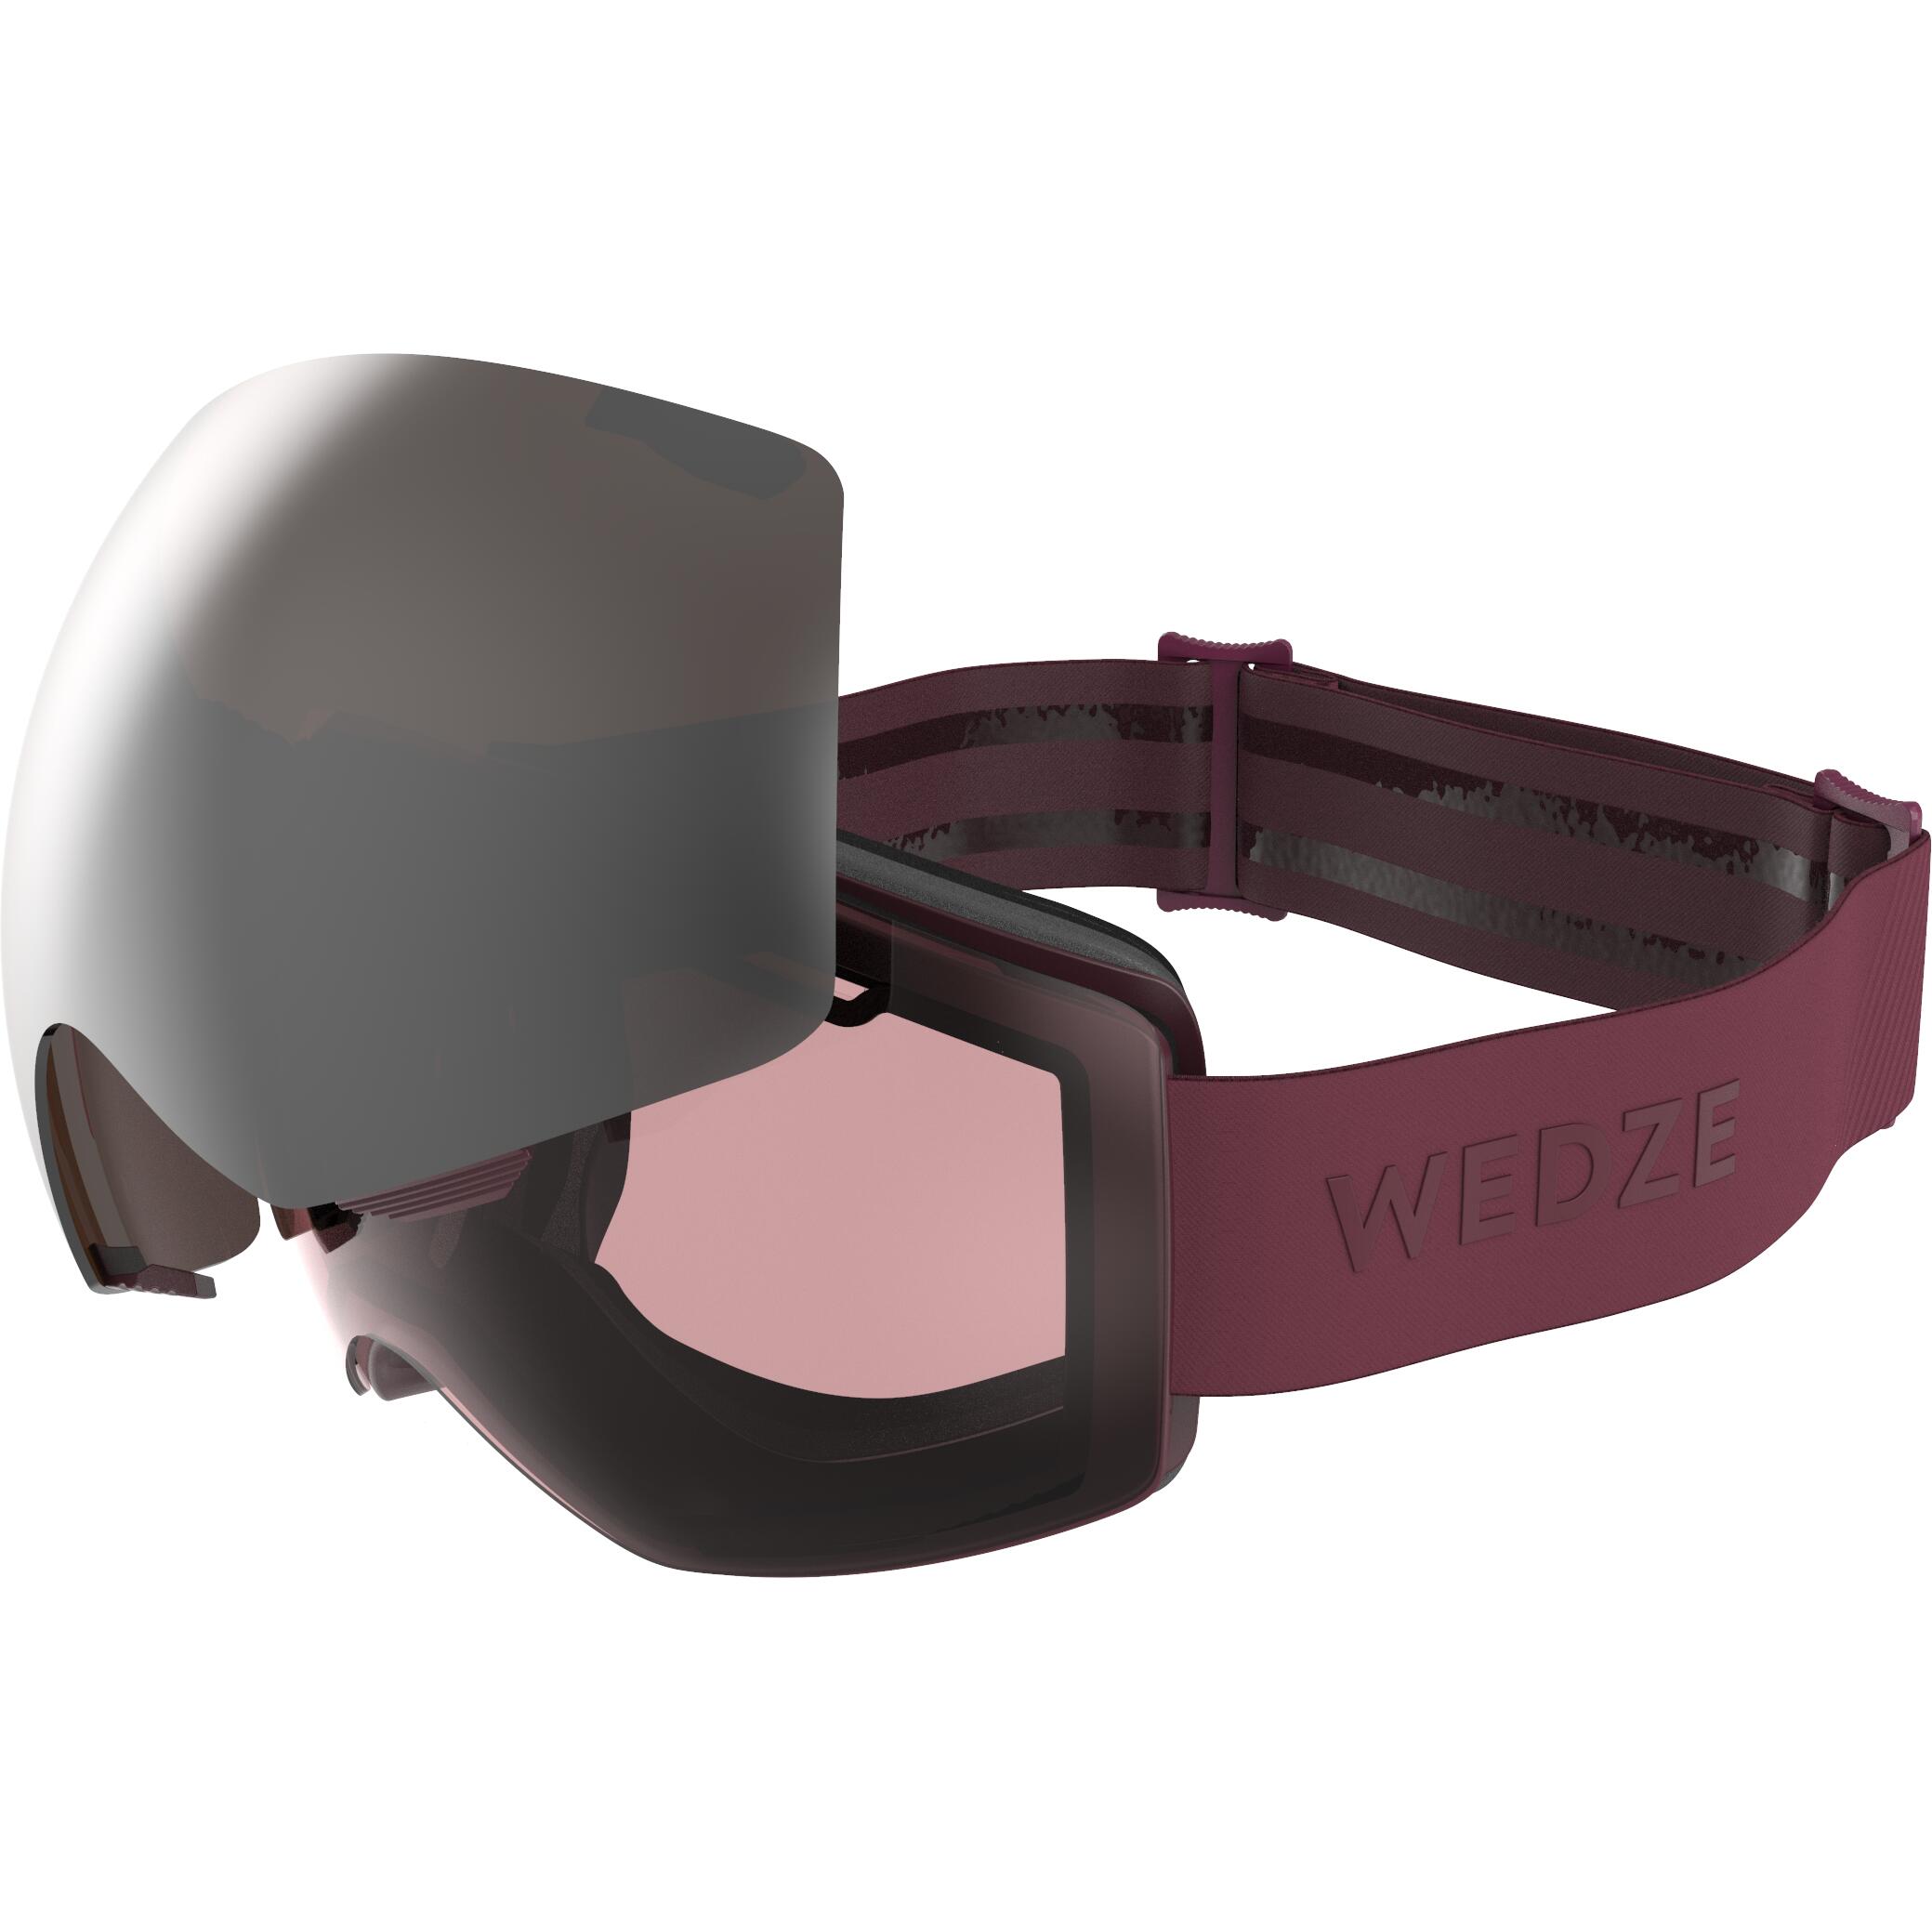 WEDZE Children's and Adult's Skiing and Snowboarding Goggles